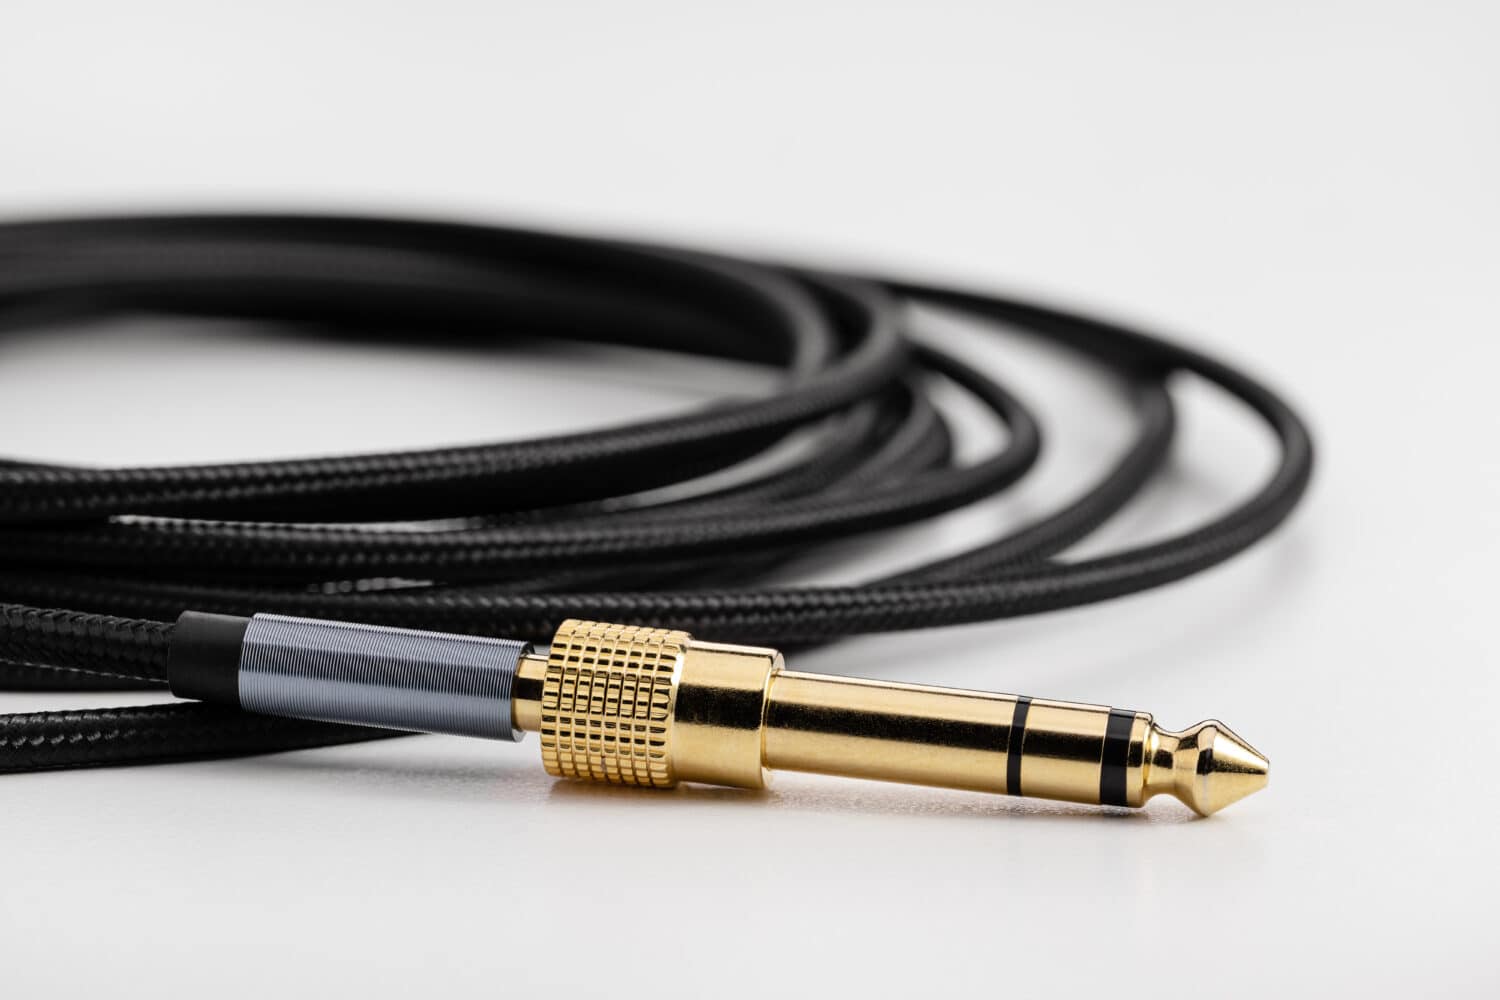 Braided flexible speaker cable with electronics plug, copy space. braid